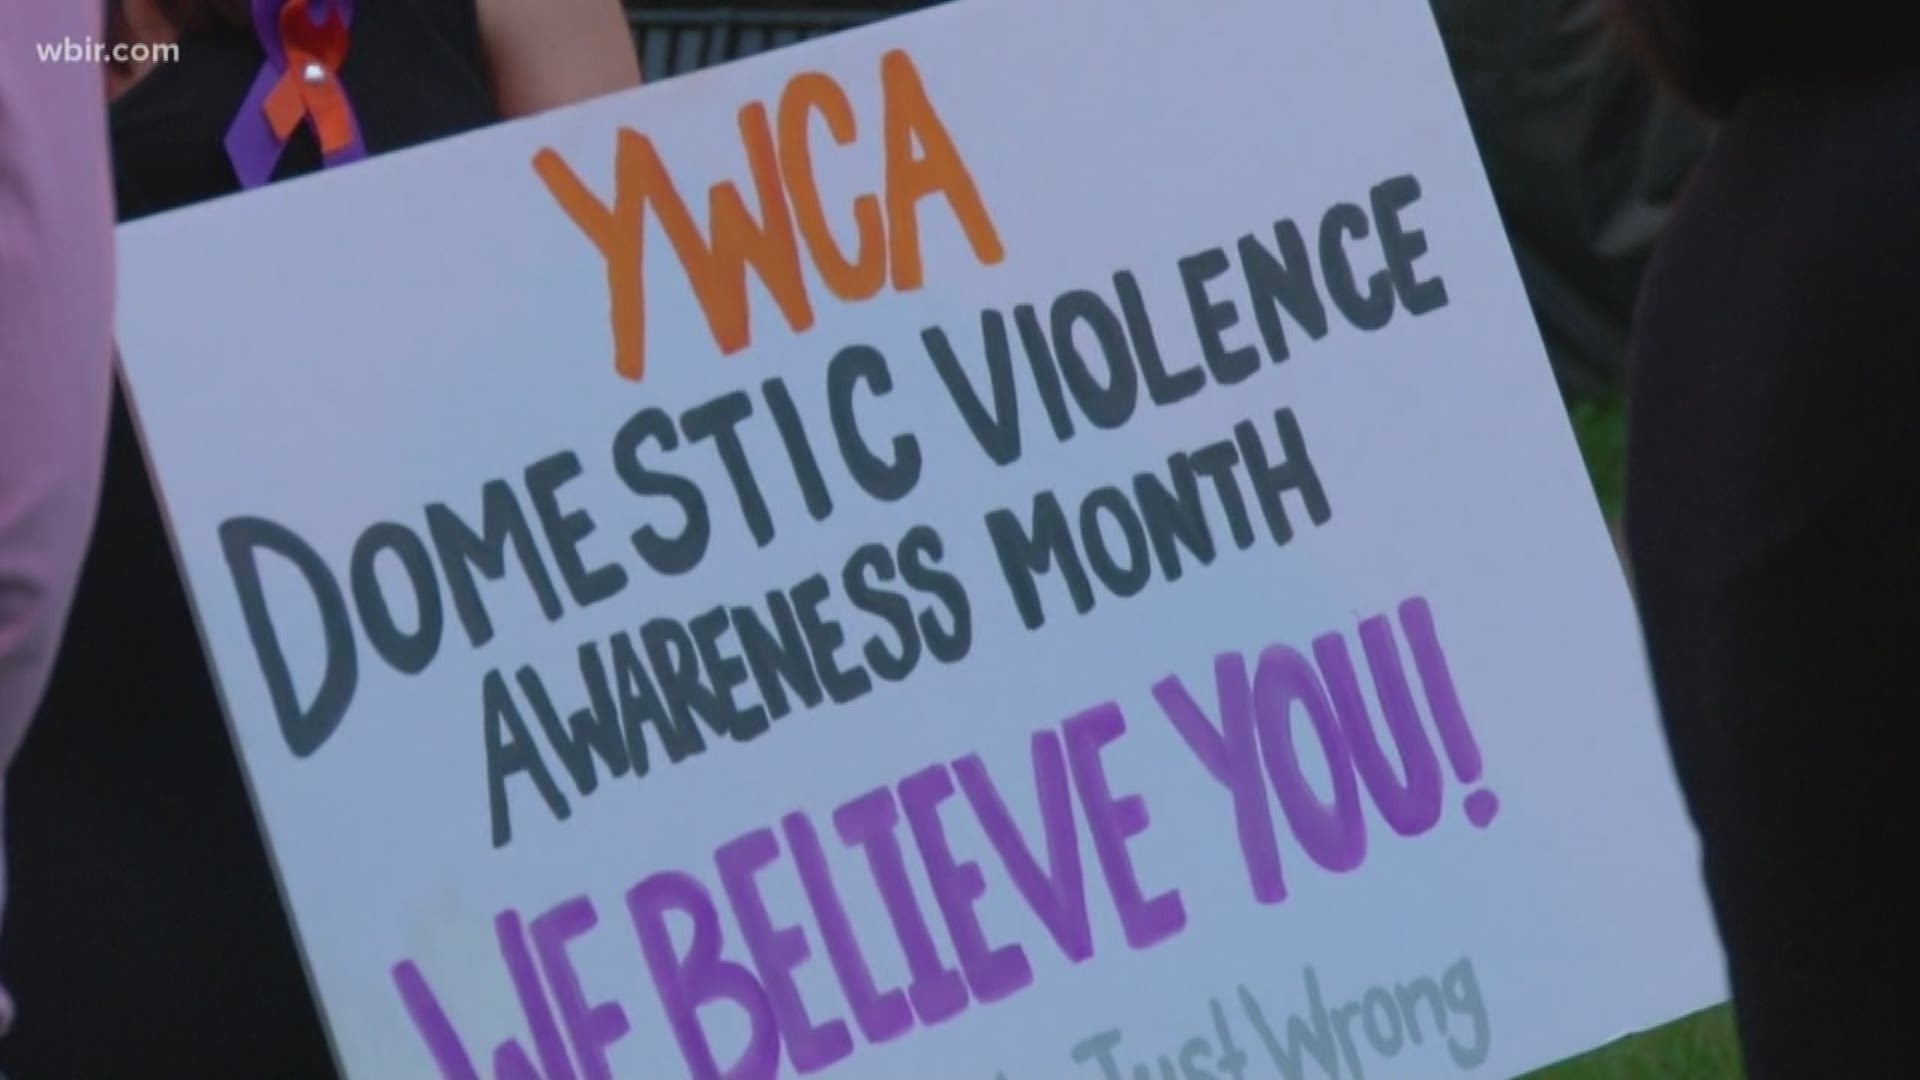 Tonight - dozens of people honored domestic violence victims as well as Emma Walker.